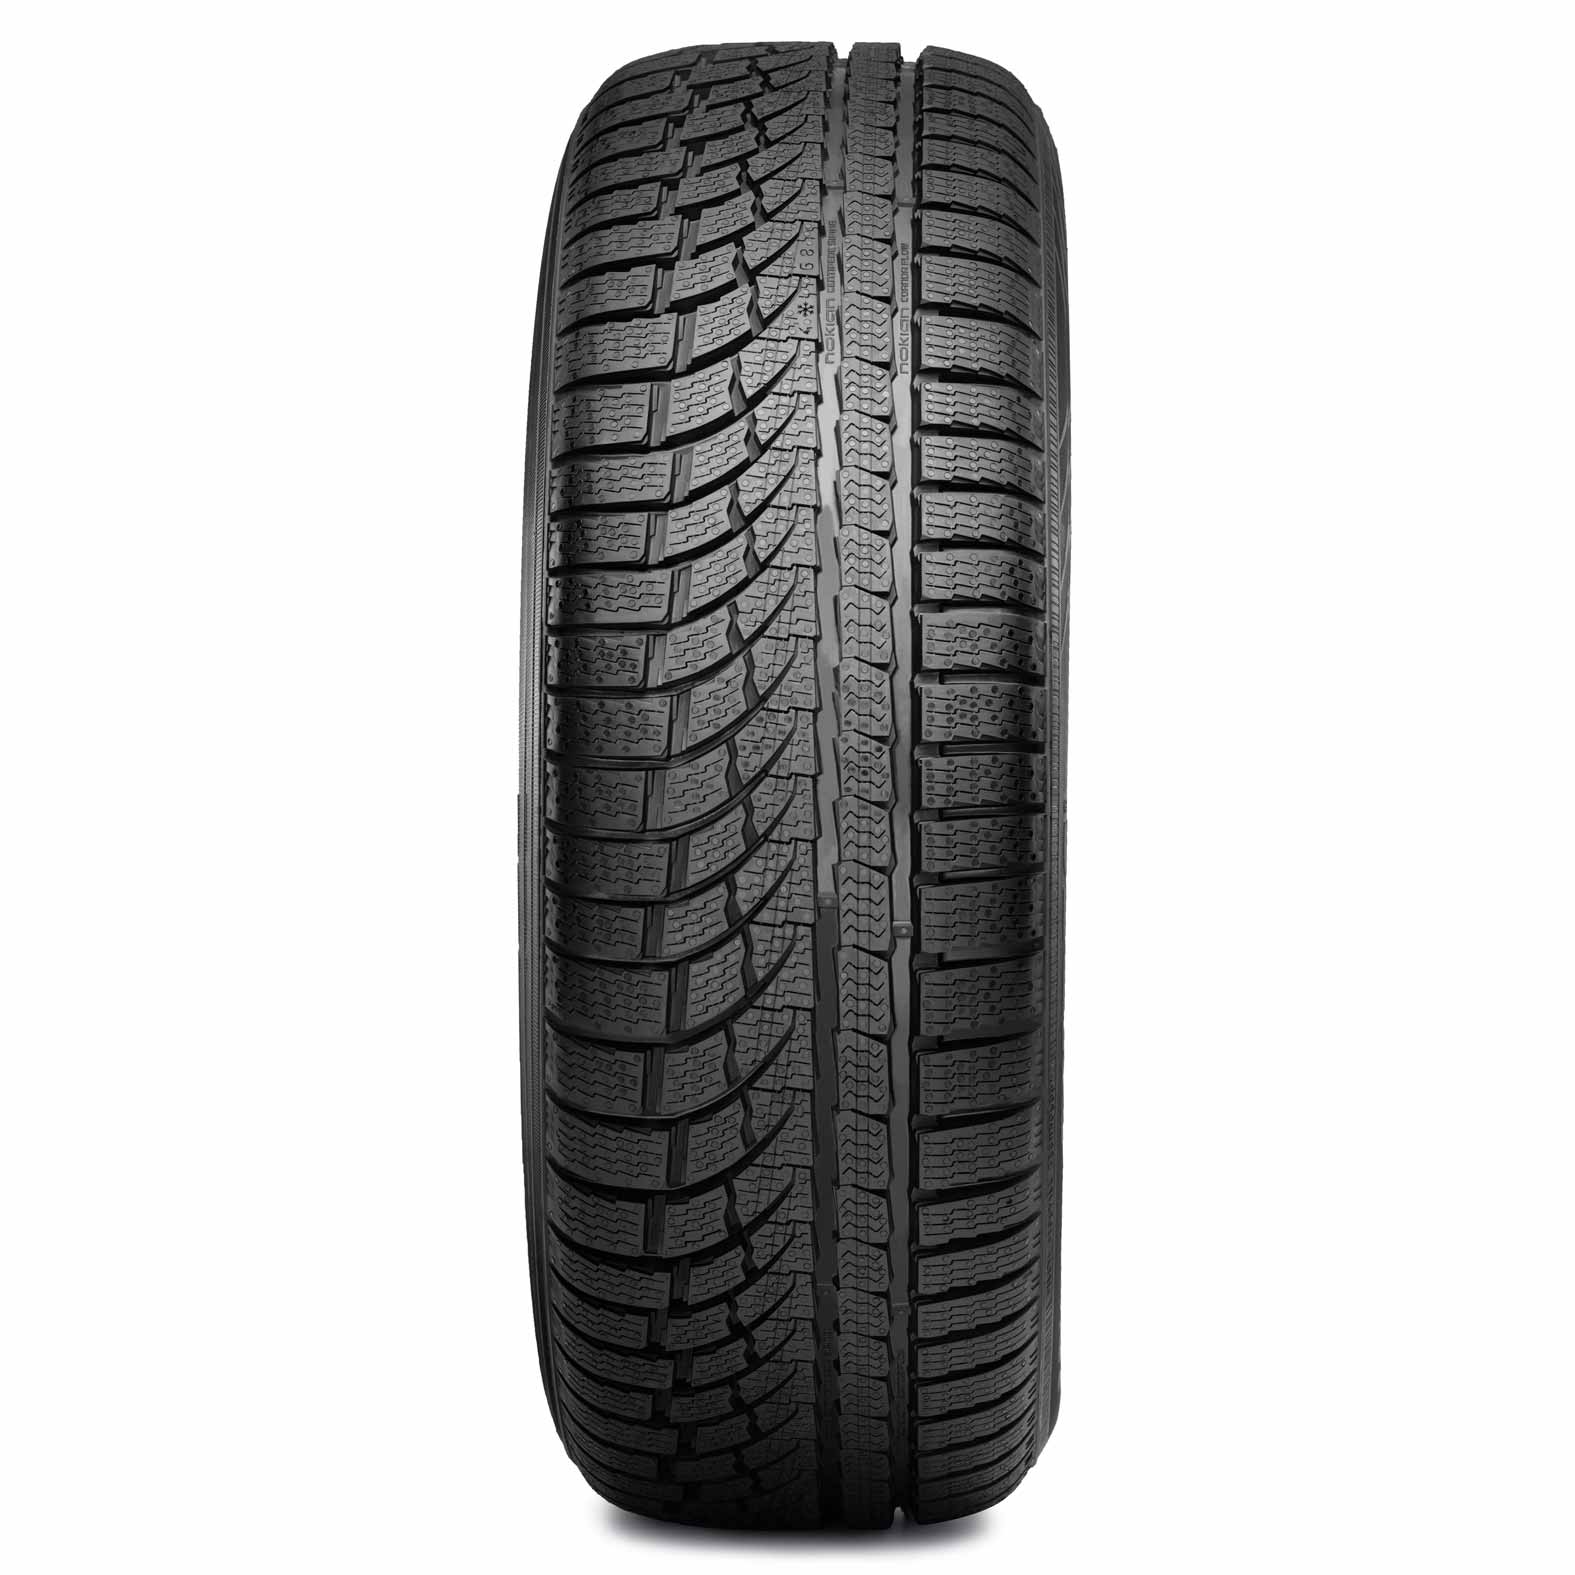 nokian-wrg4-suv-tires-for-all-weather-kal-tire